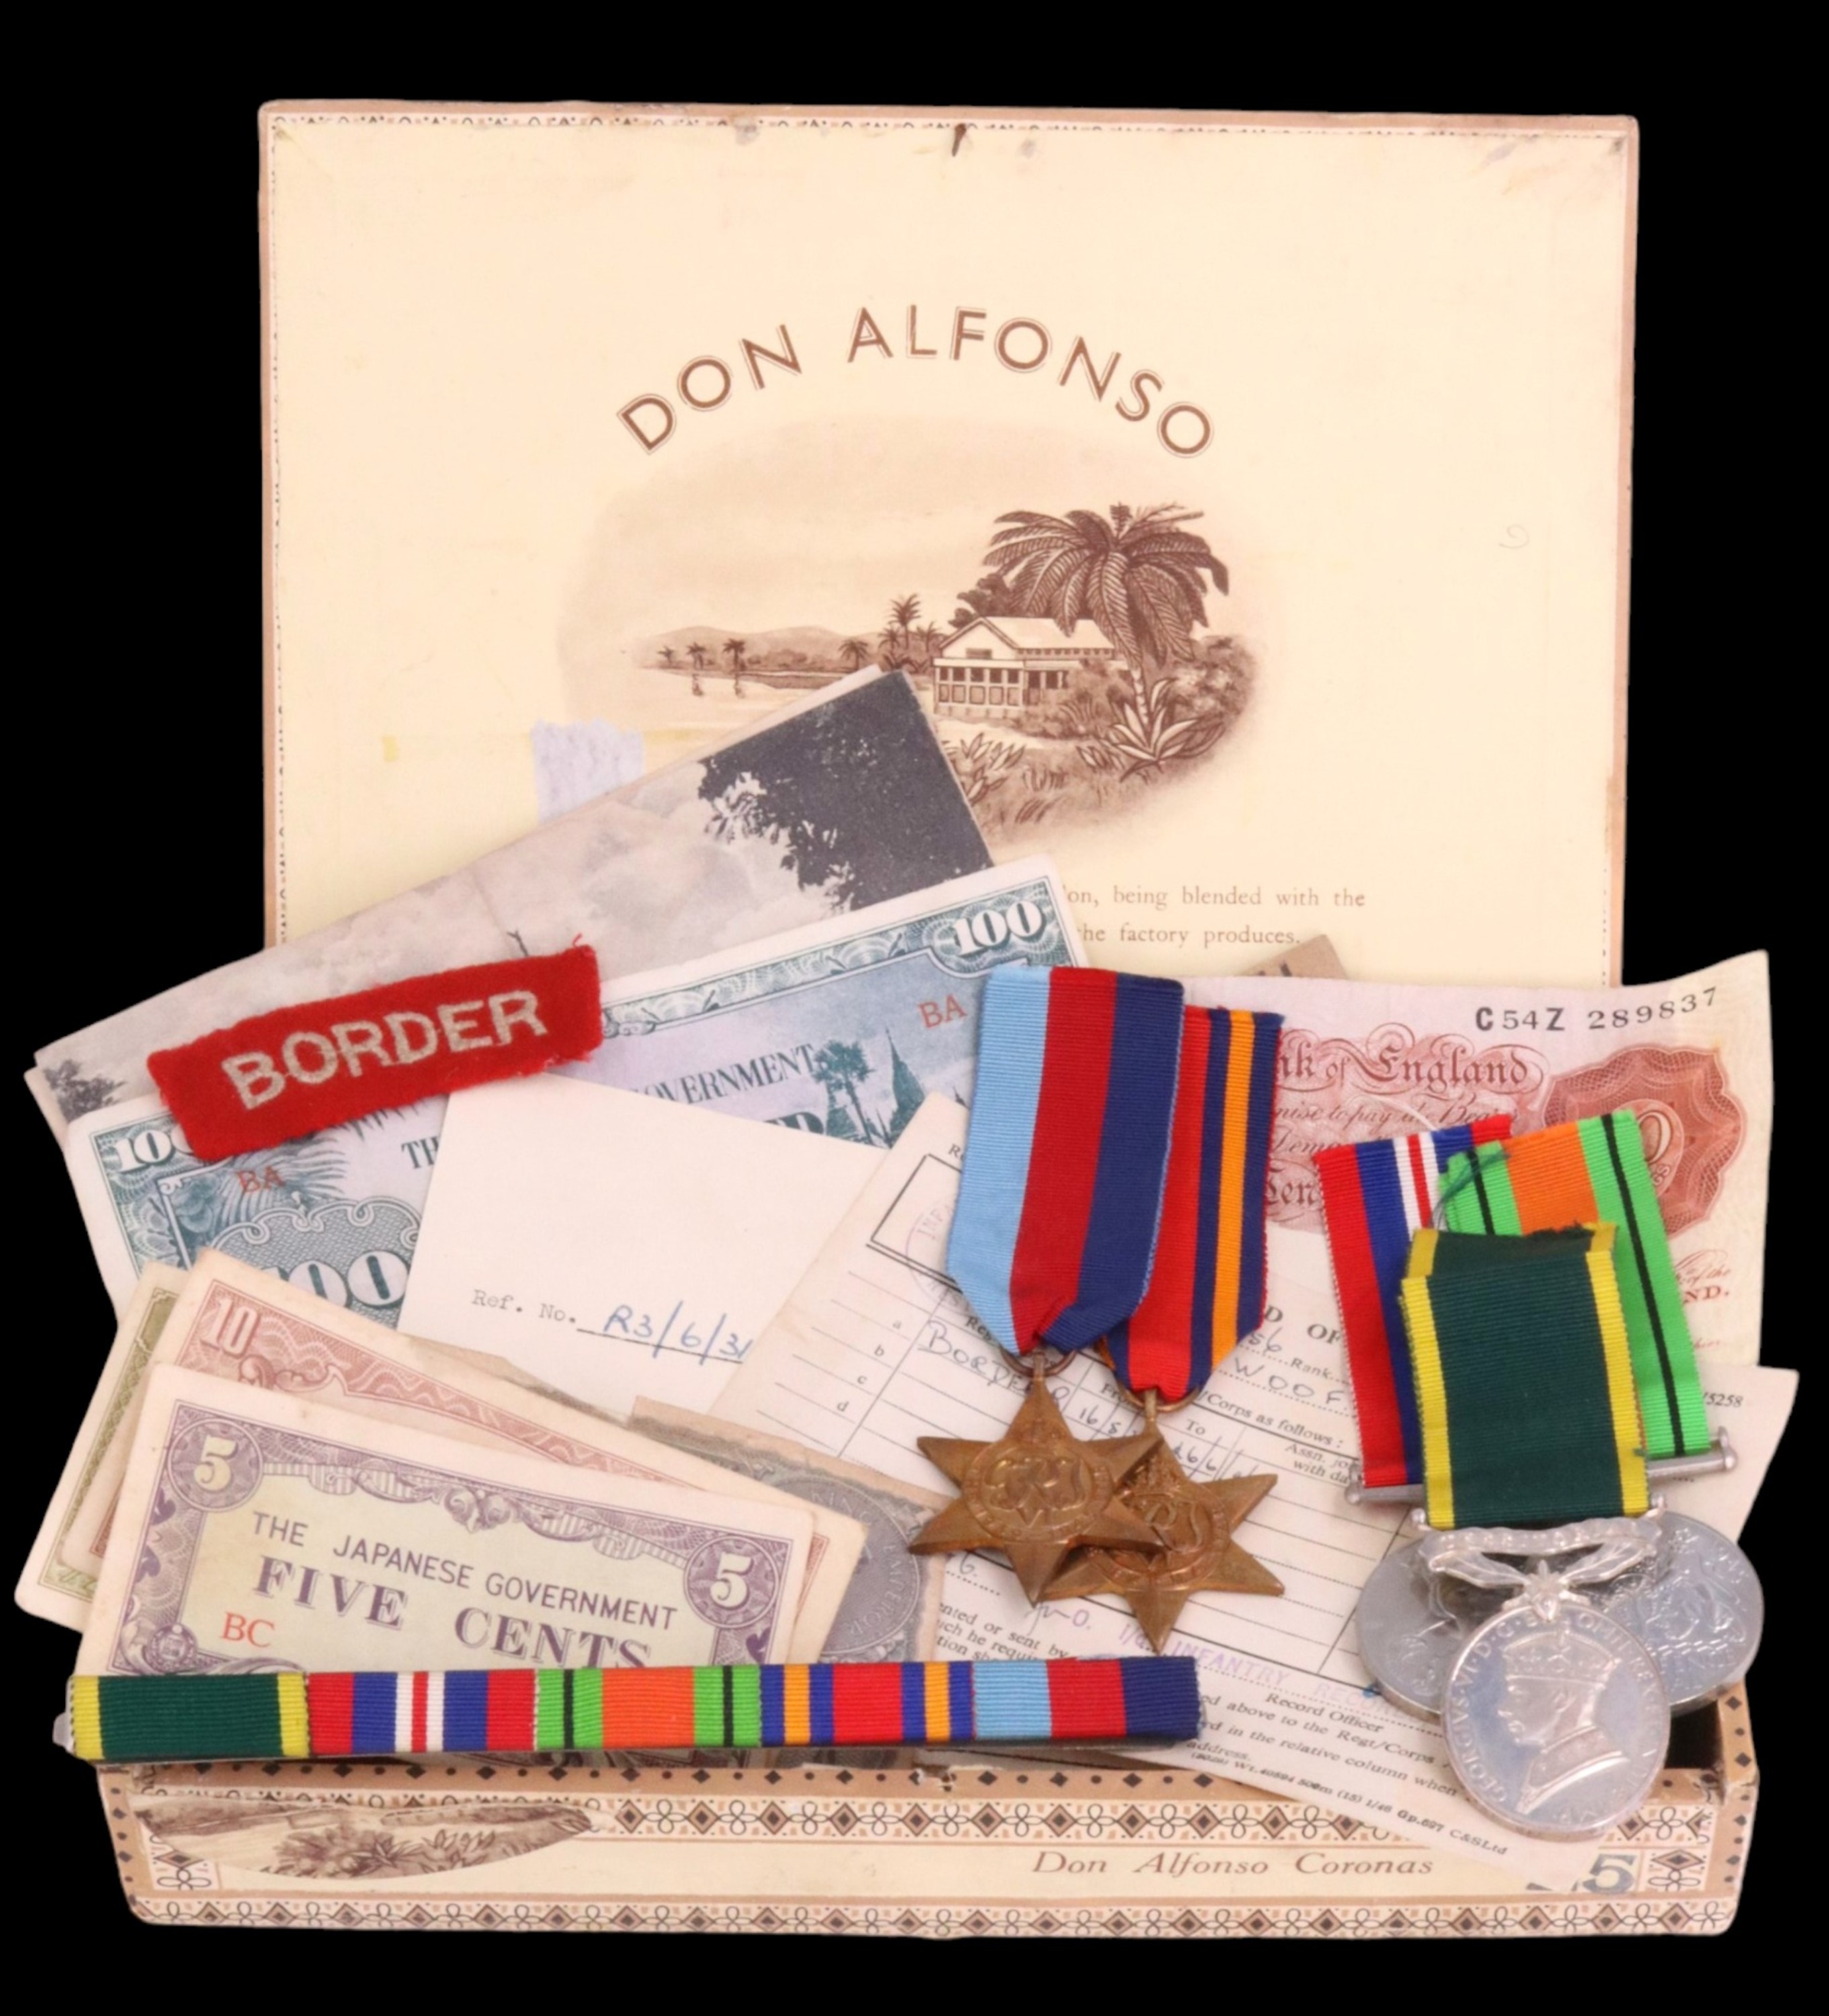 A Second World War Far East Theatre campaign medal and document group including Burma Star and